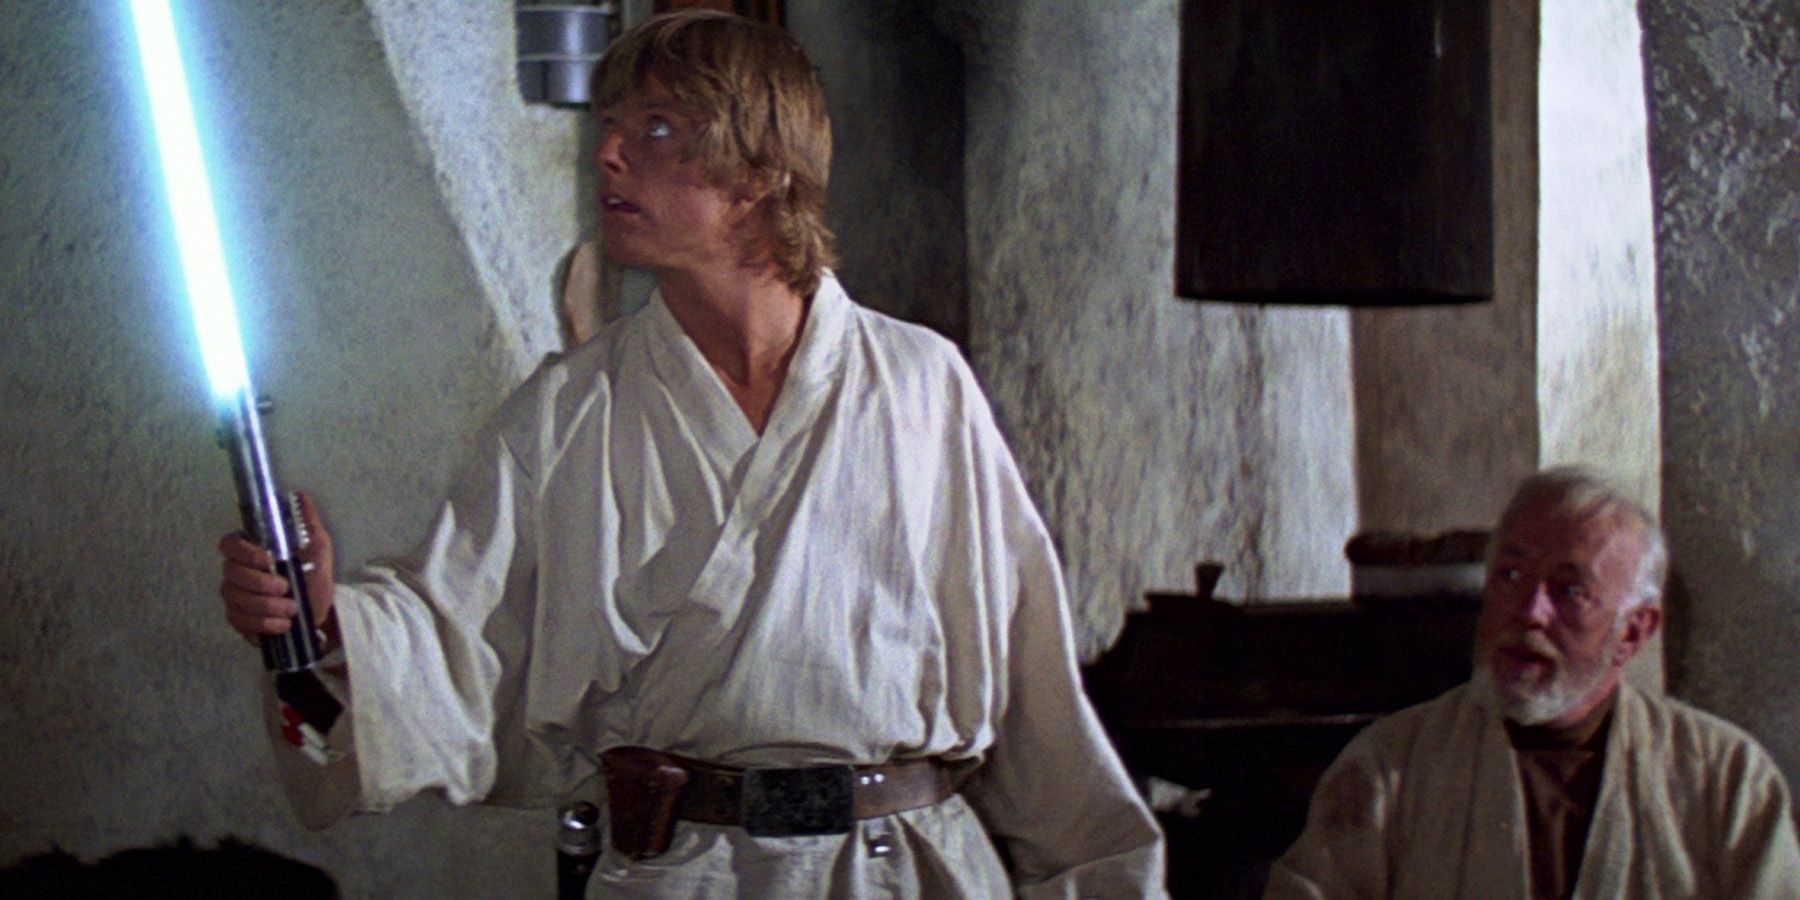 Luke holding a lightsaber while Obi-Wan watches in Star Wars A New Hope